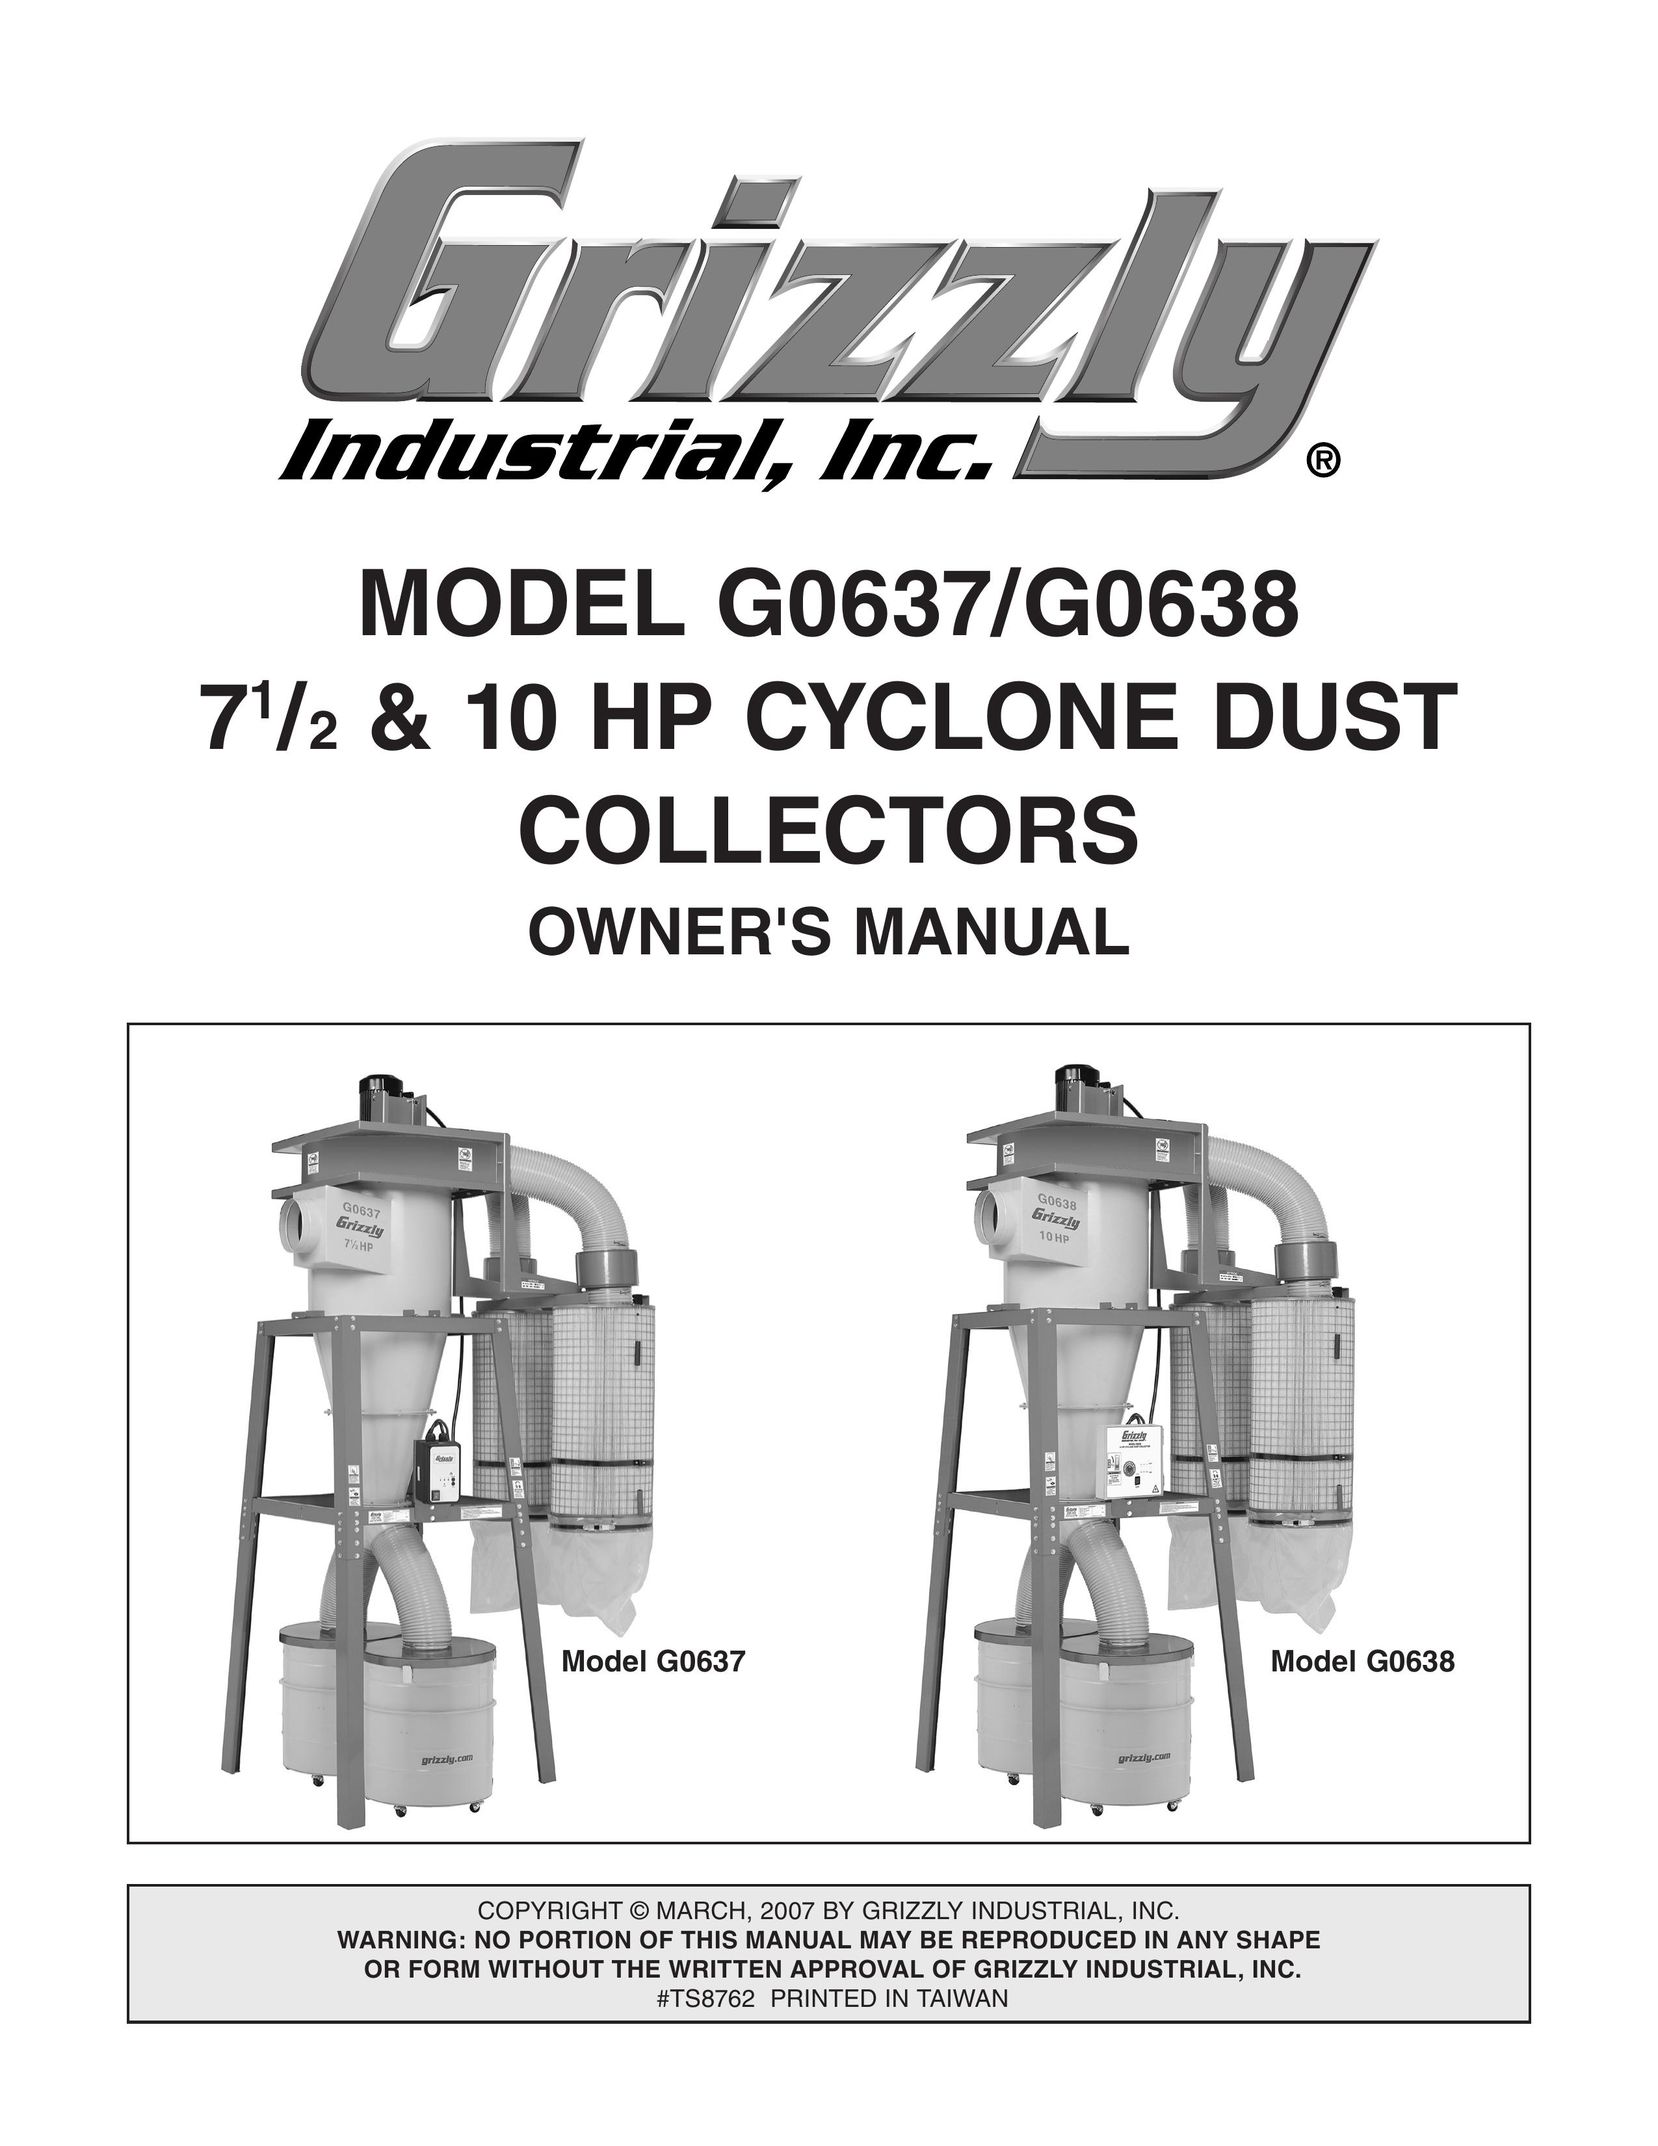 Grizzly G0638 Dust Collector User Manual